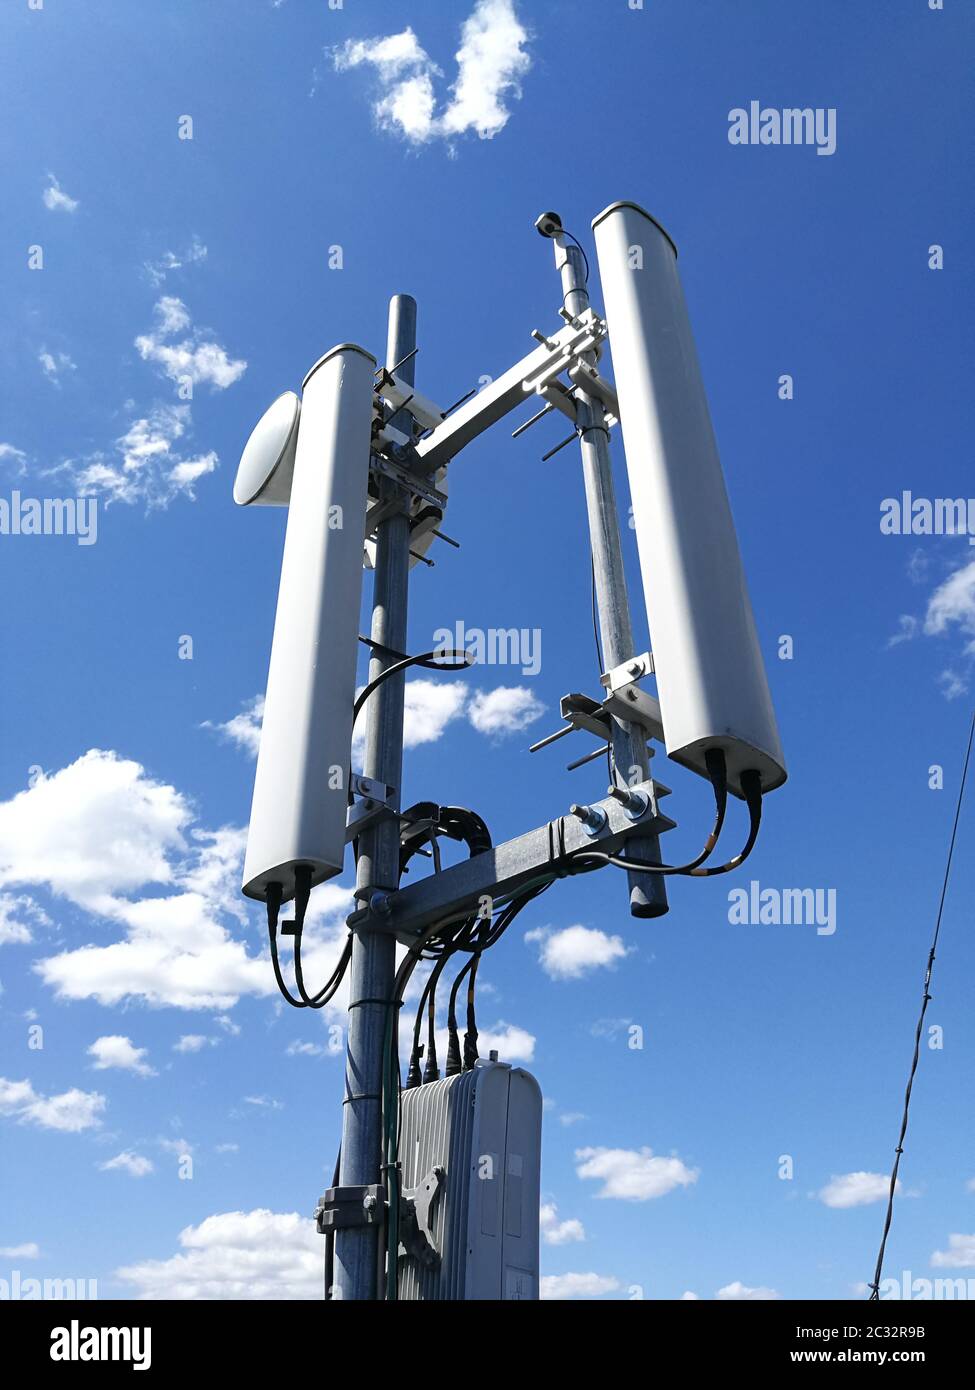 GSM (Global System for Mobile communication) base station and repeater  tower in front of blue cloudy sky for telecommunications Stock Photo - Alamy